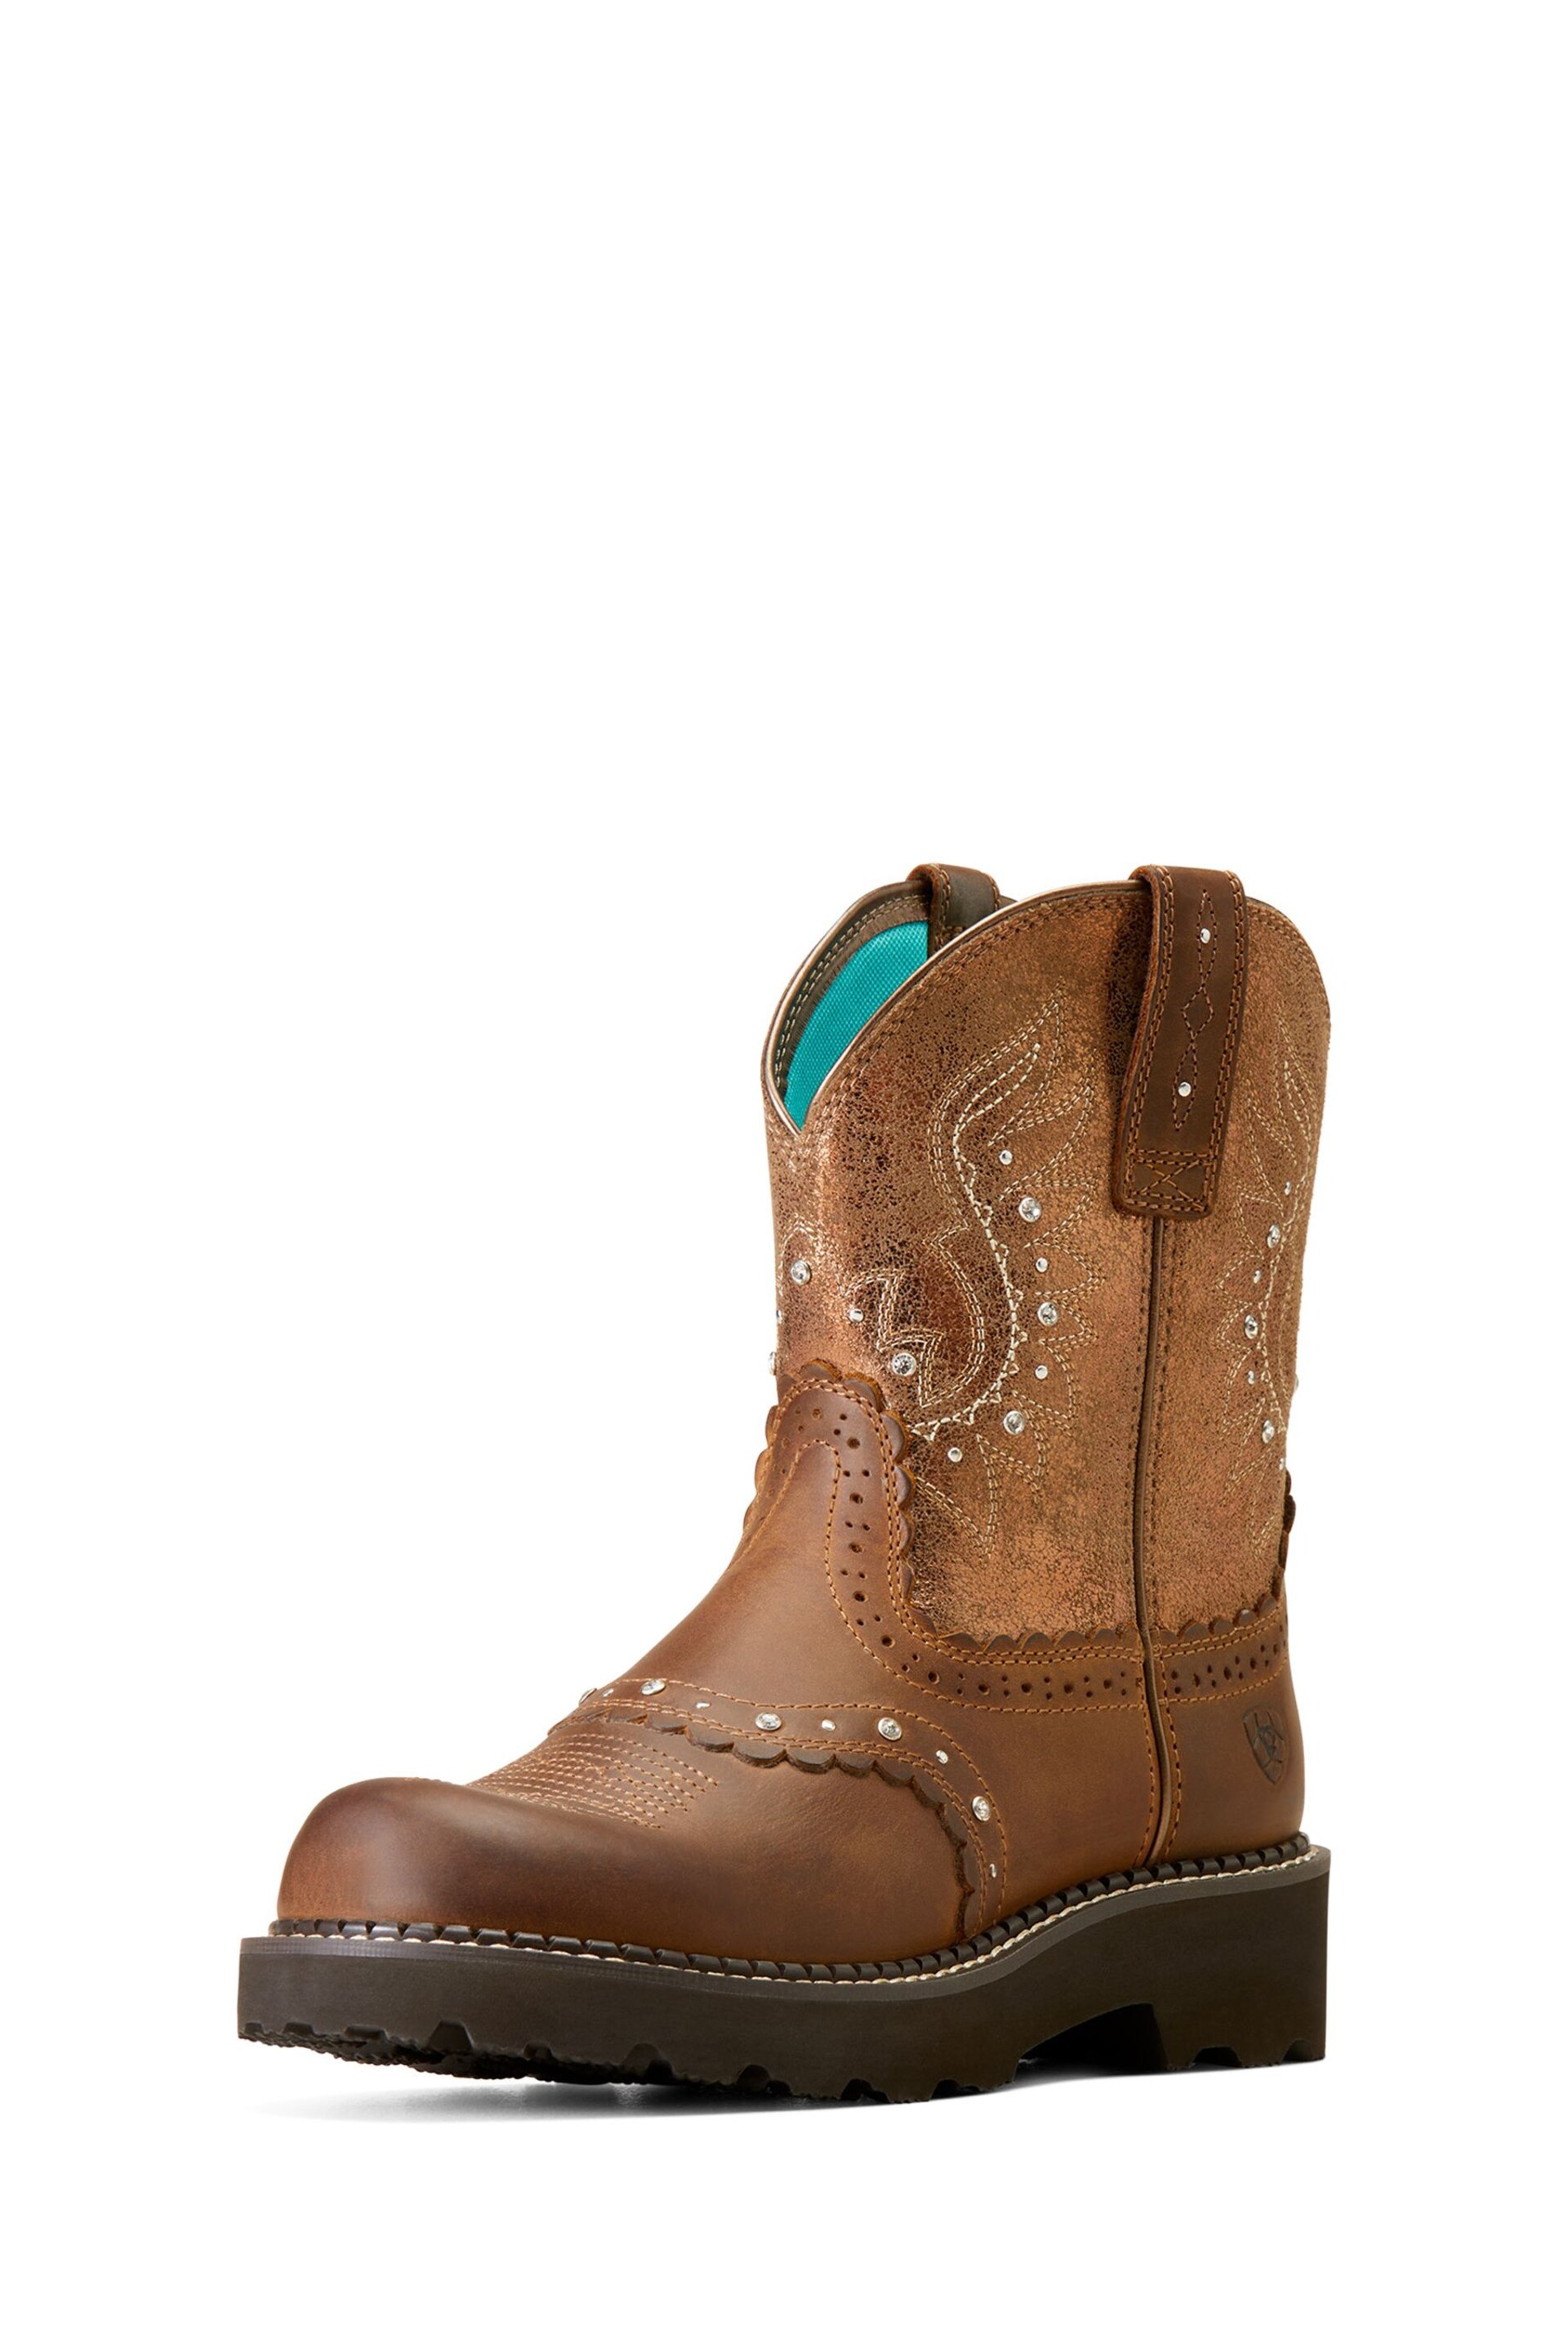 Ariat Natural Gembaby Boots - Image 2 of 3